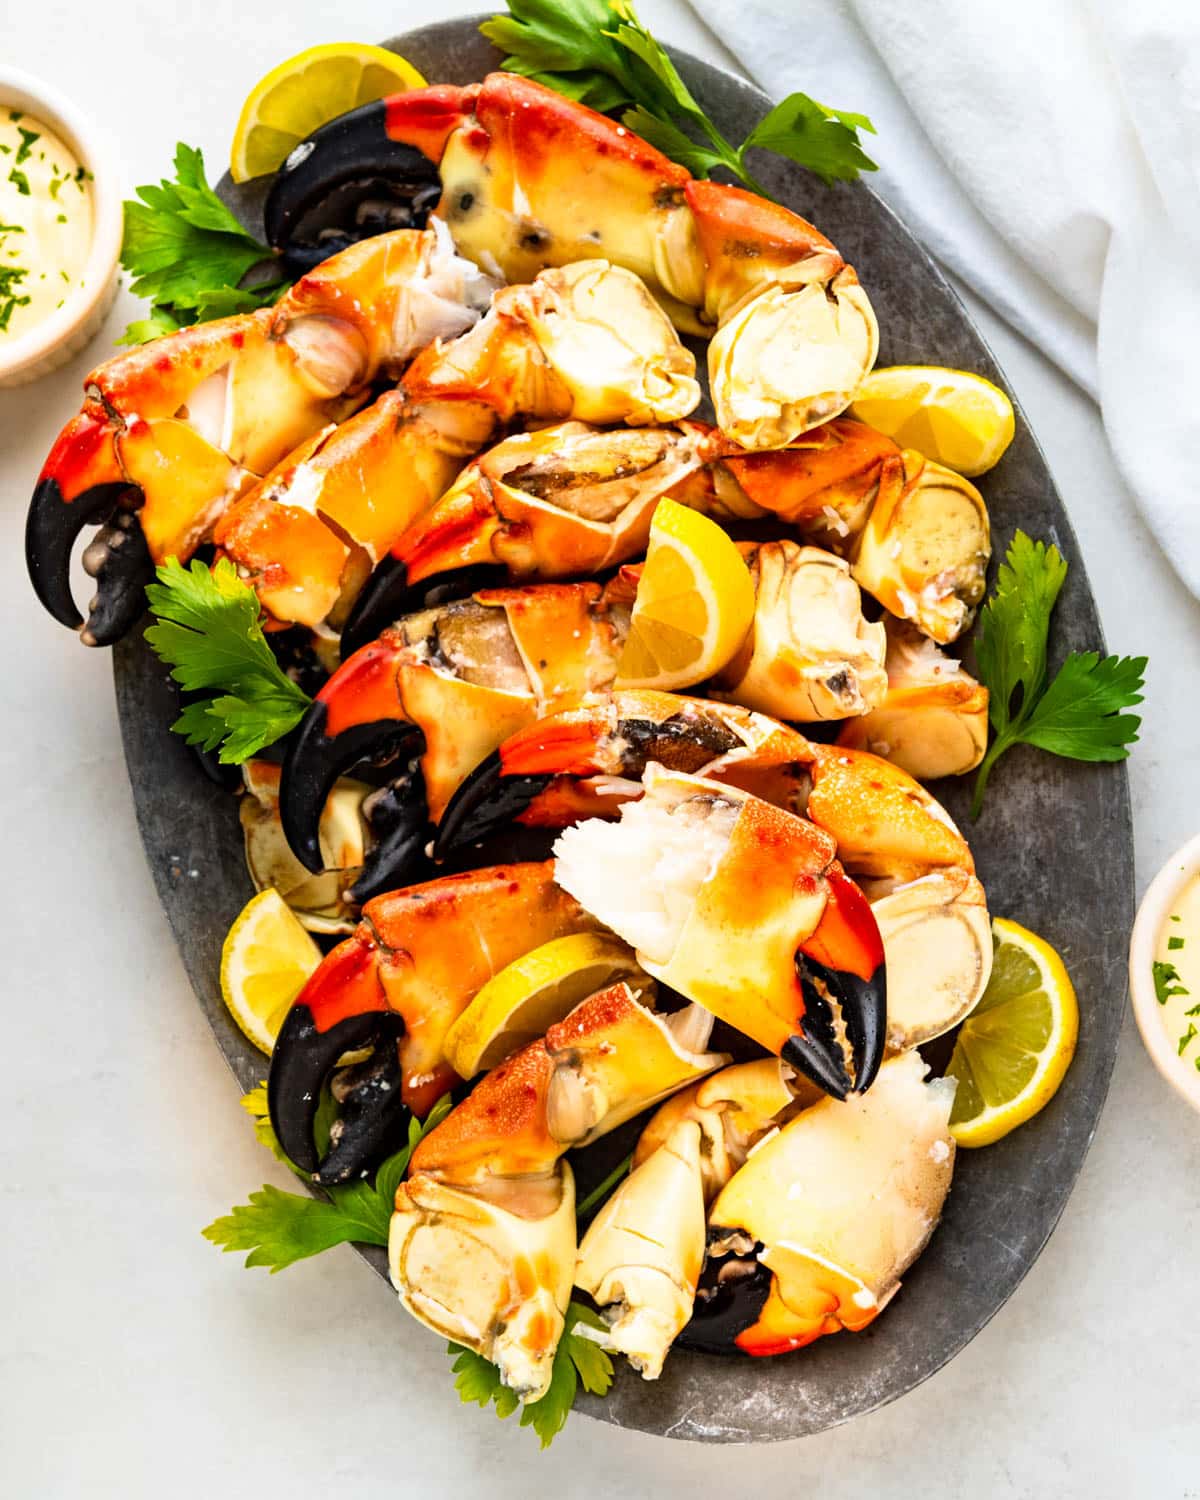 Stone crabs on a platter with mustard dipping sauce.